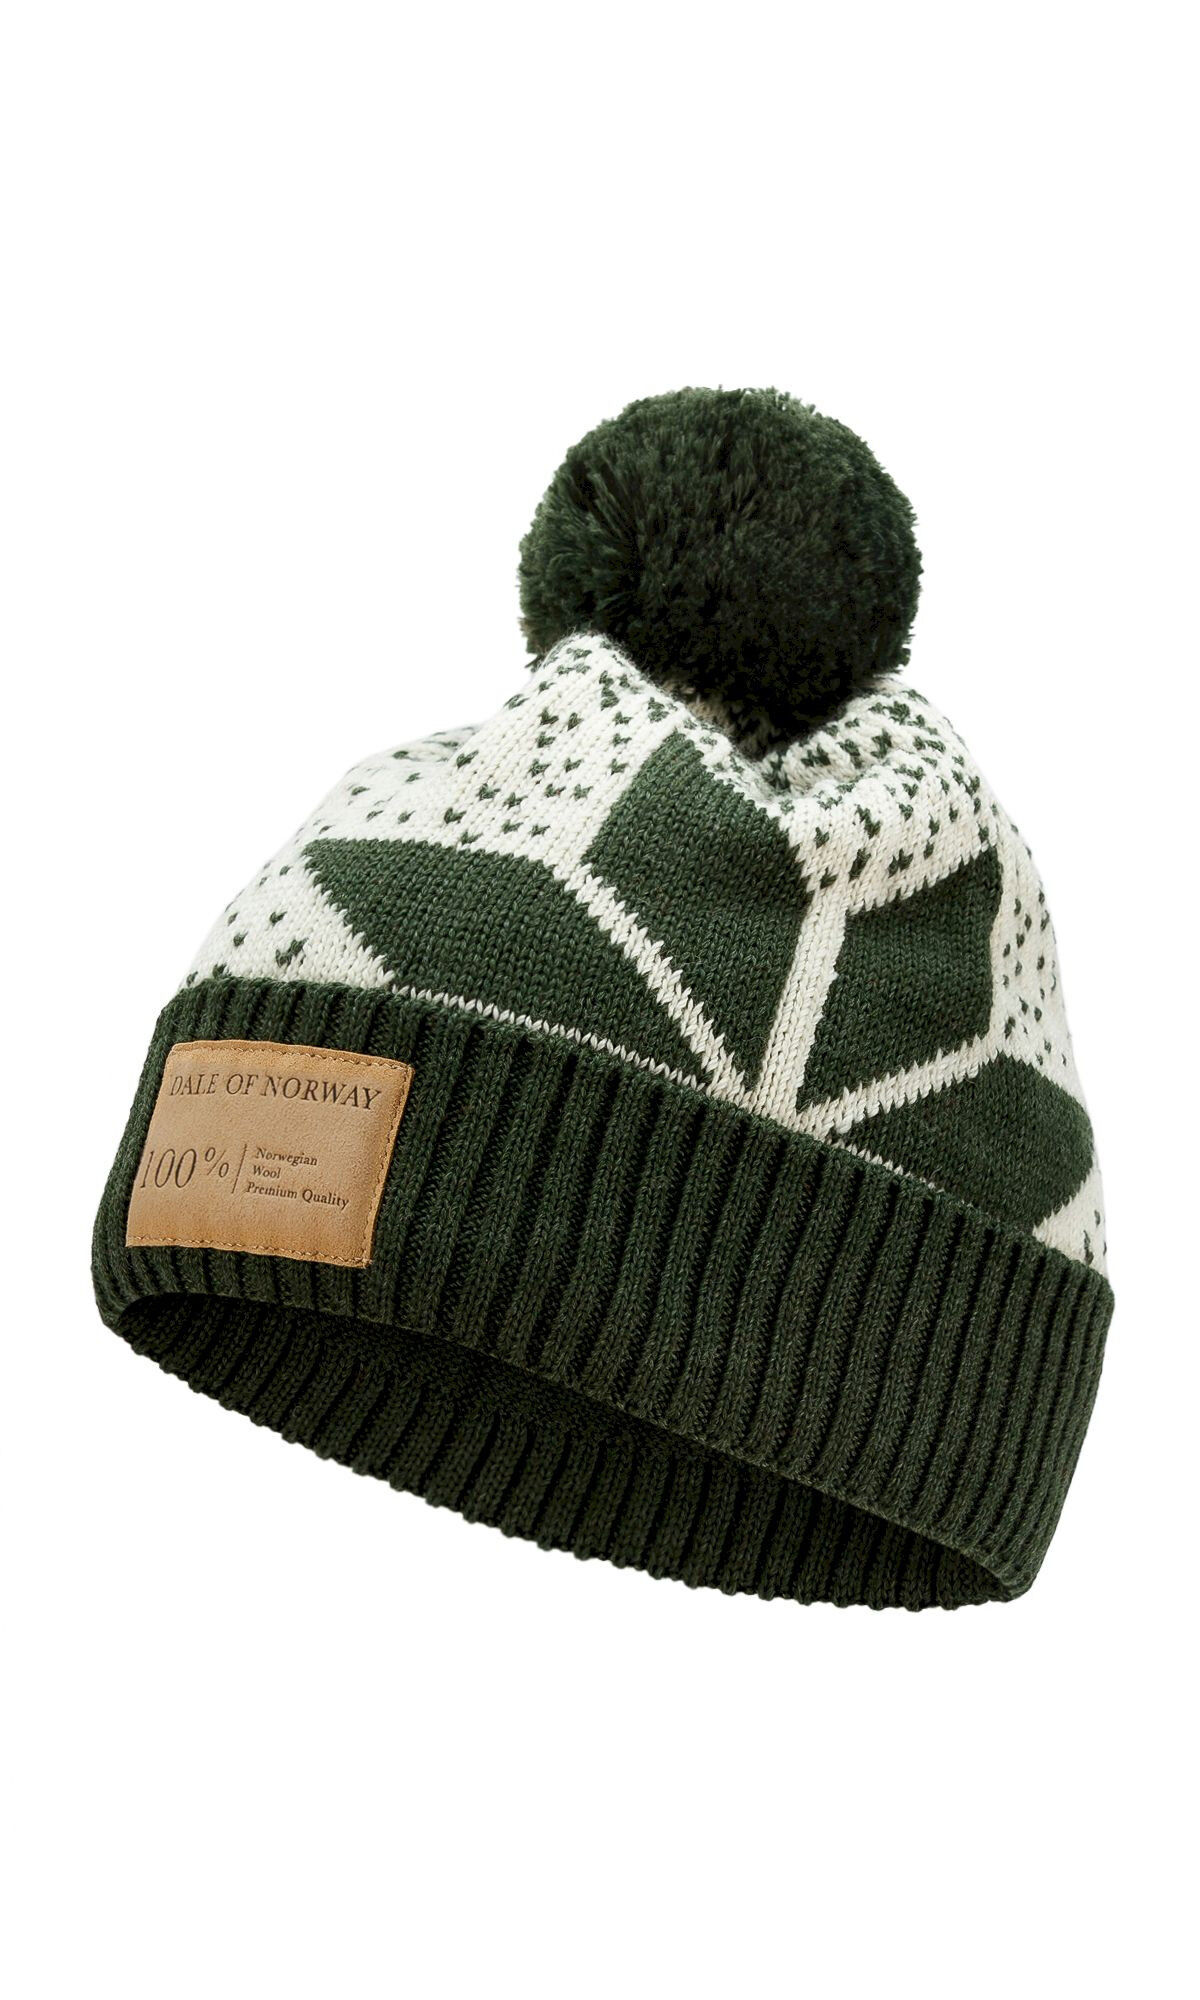 Dale of Norway Winter Star Hat - Pipo